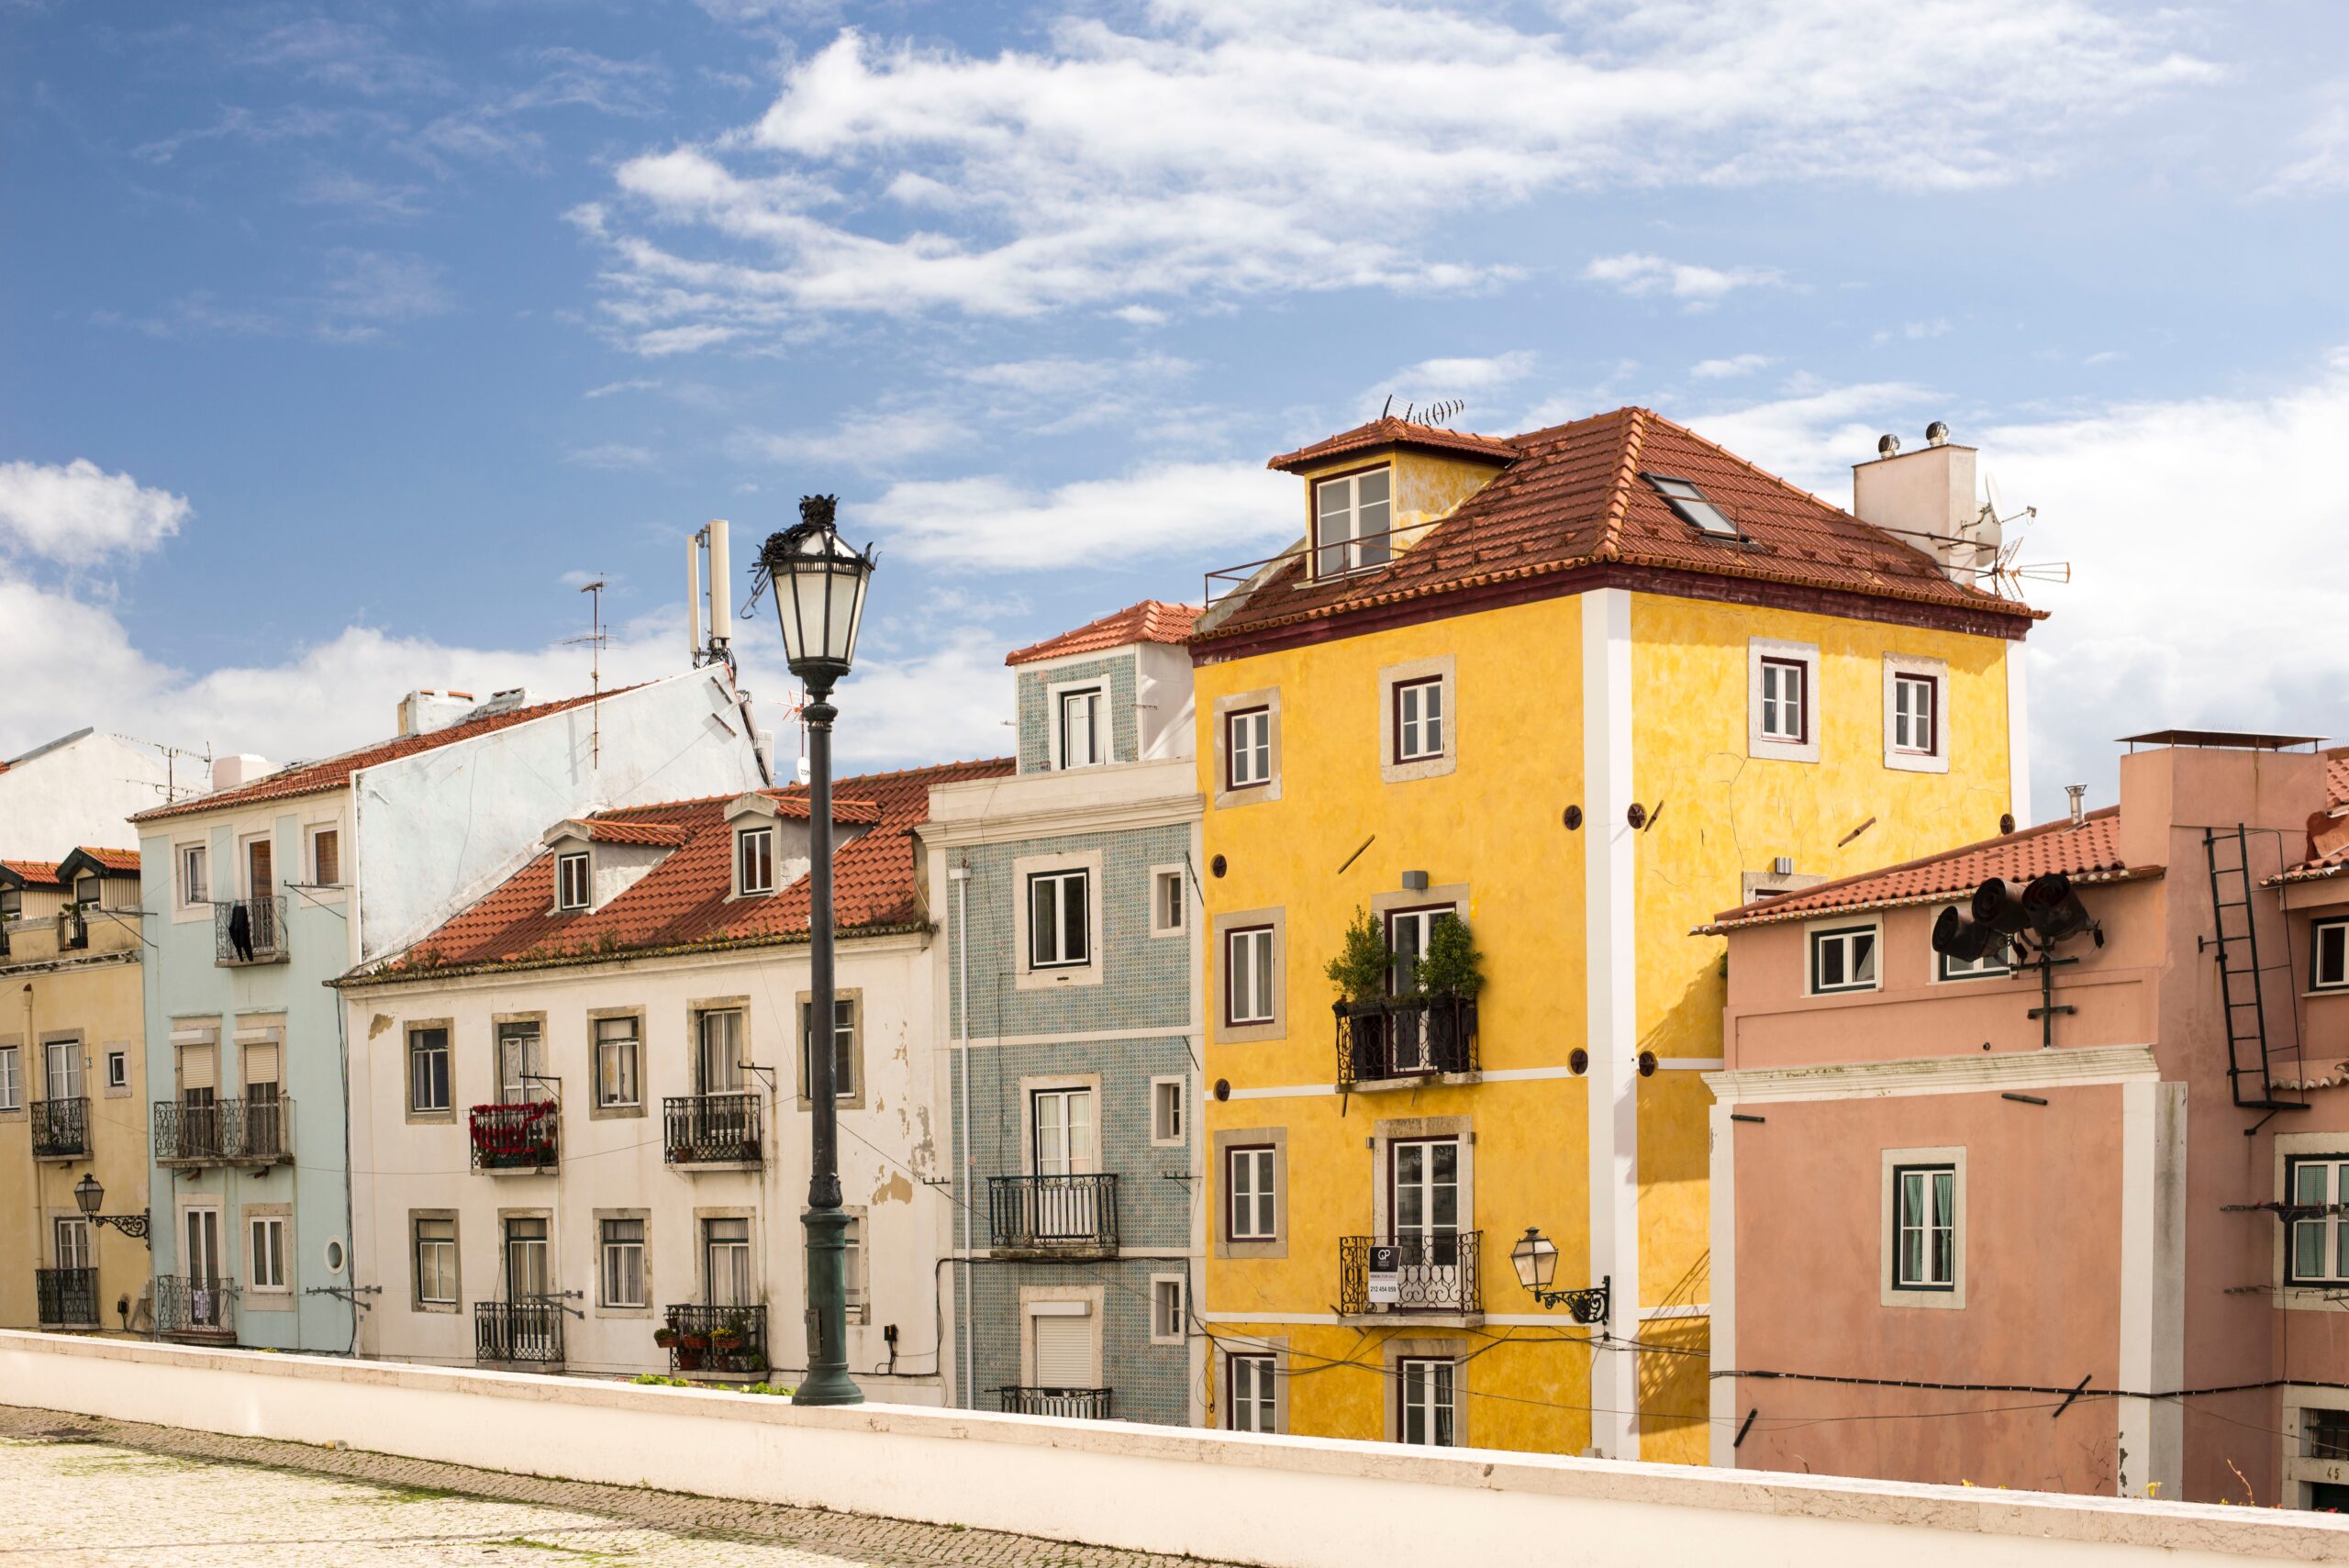 Luxury Villas and Apartments to rent in Lisbon, rich with a history of exploration and discovery